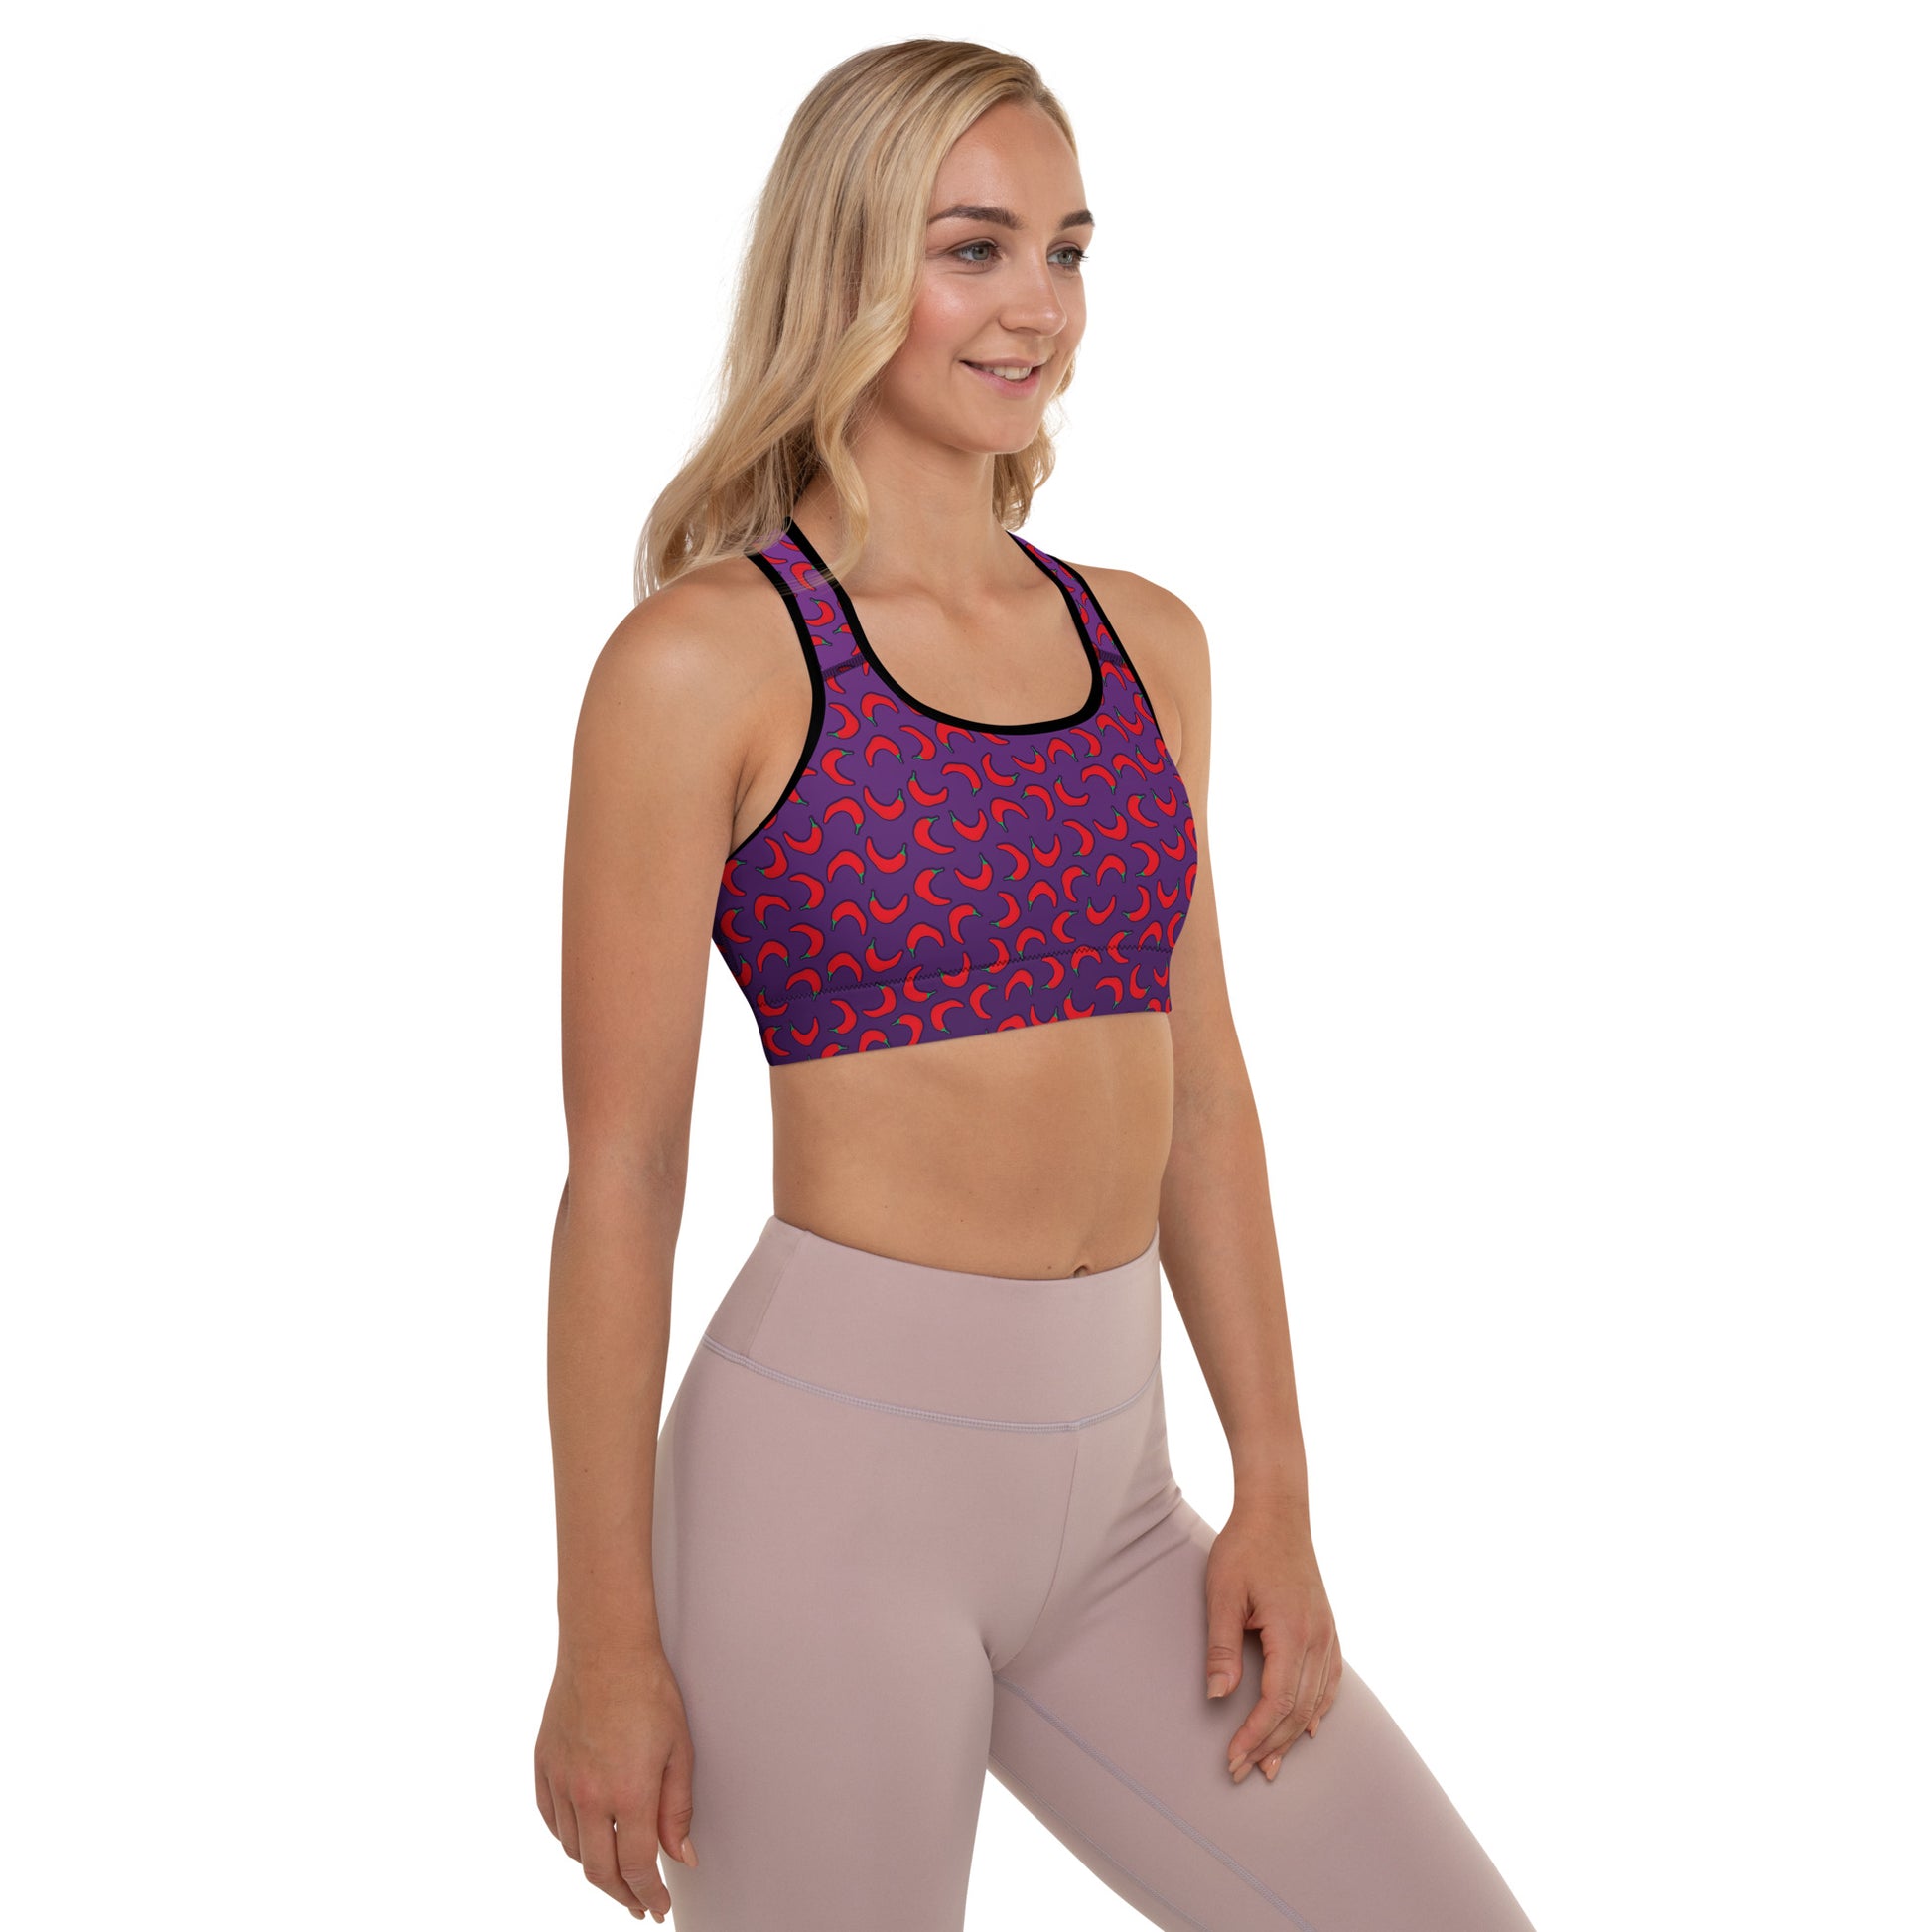 Weirdo | Sports bra for weird females who consider themselves as an Extremely Hot Weirdo! This sports bra is purple with red peppers printed all over and has our funny meme printed at the back of the bra.